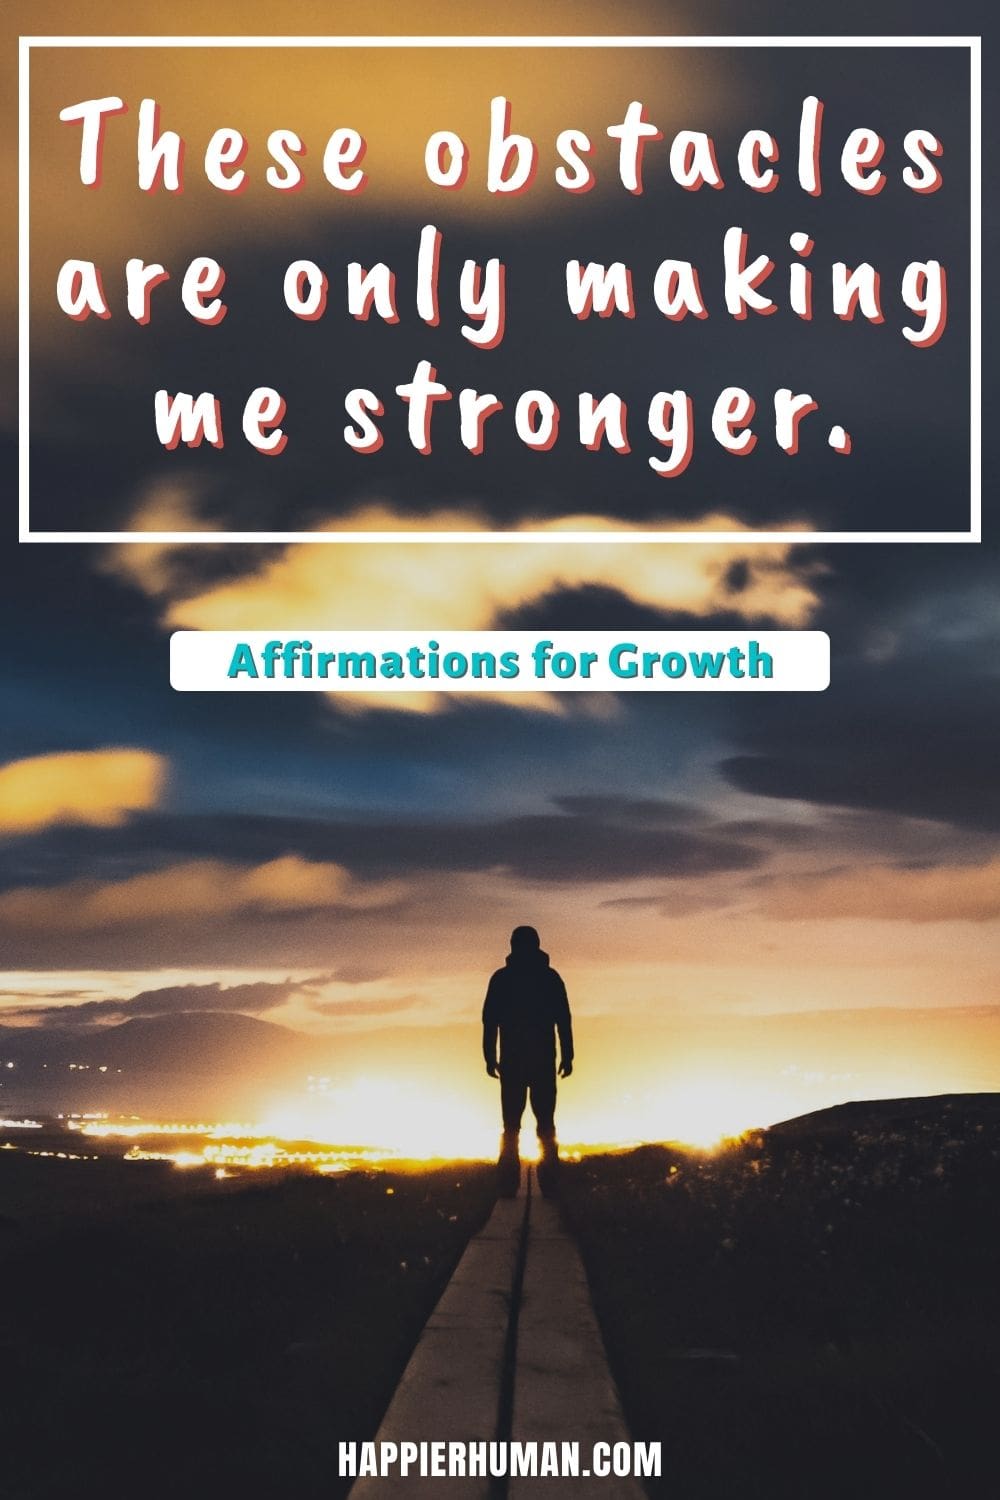 Affirmations for Growth - These obstacles are only making me stronger. | affirmations for life direction | affirmations for self love and growth | affirmations for trying new things #selfimprovement #success #positivity